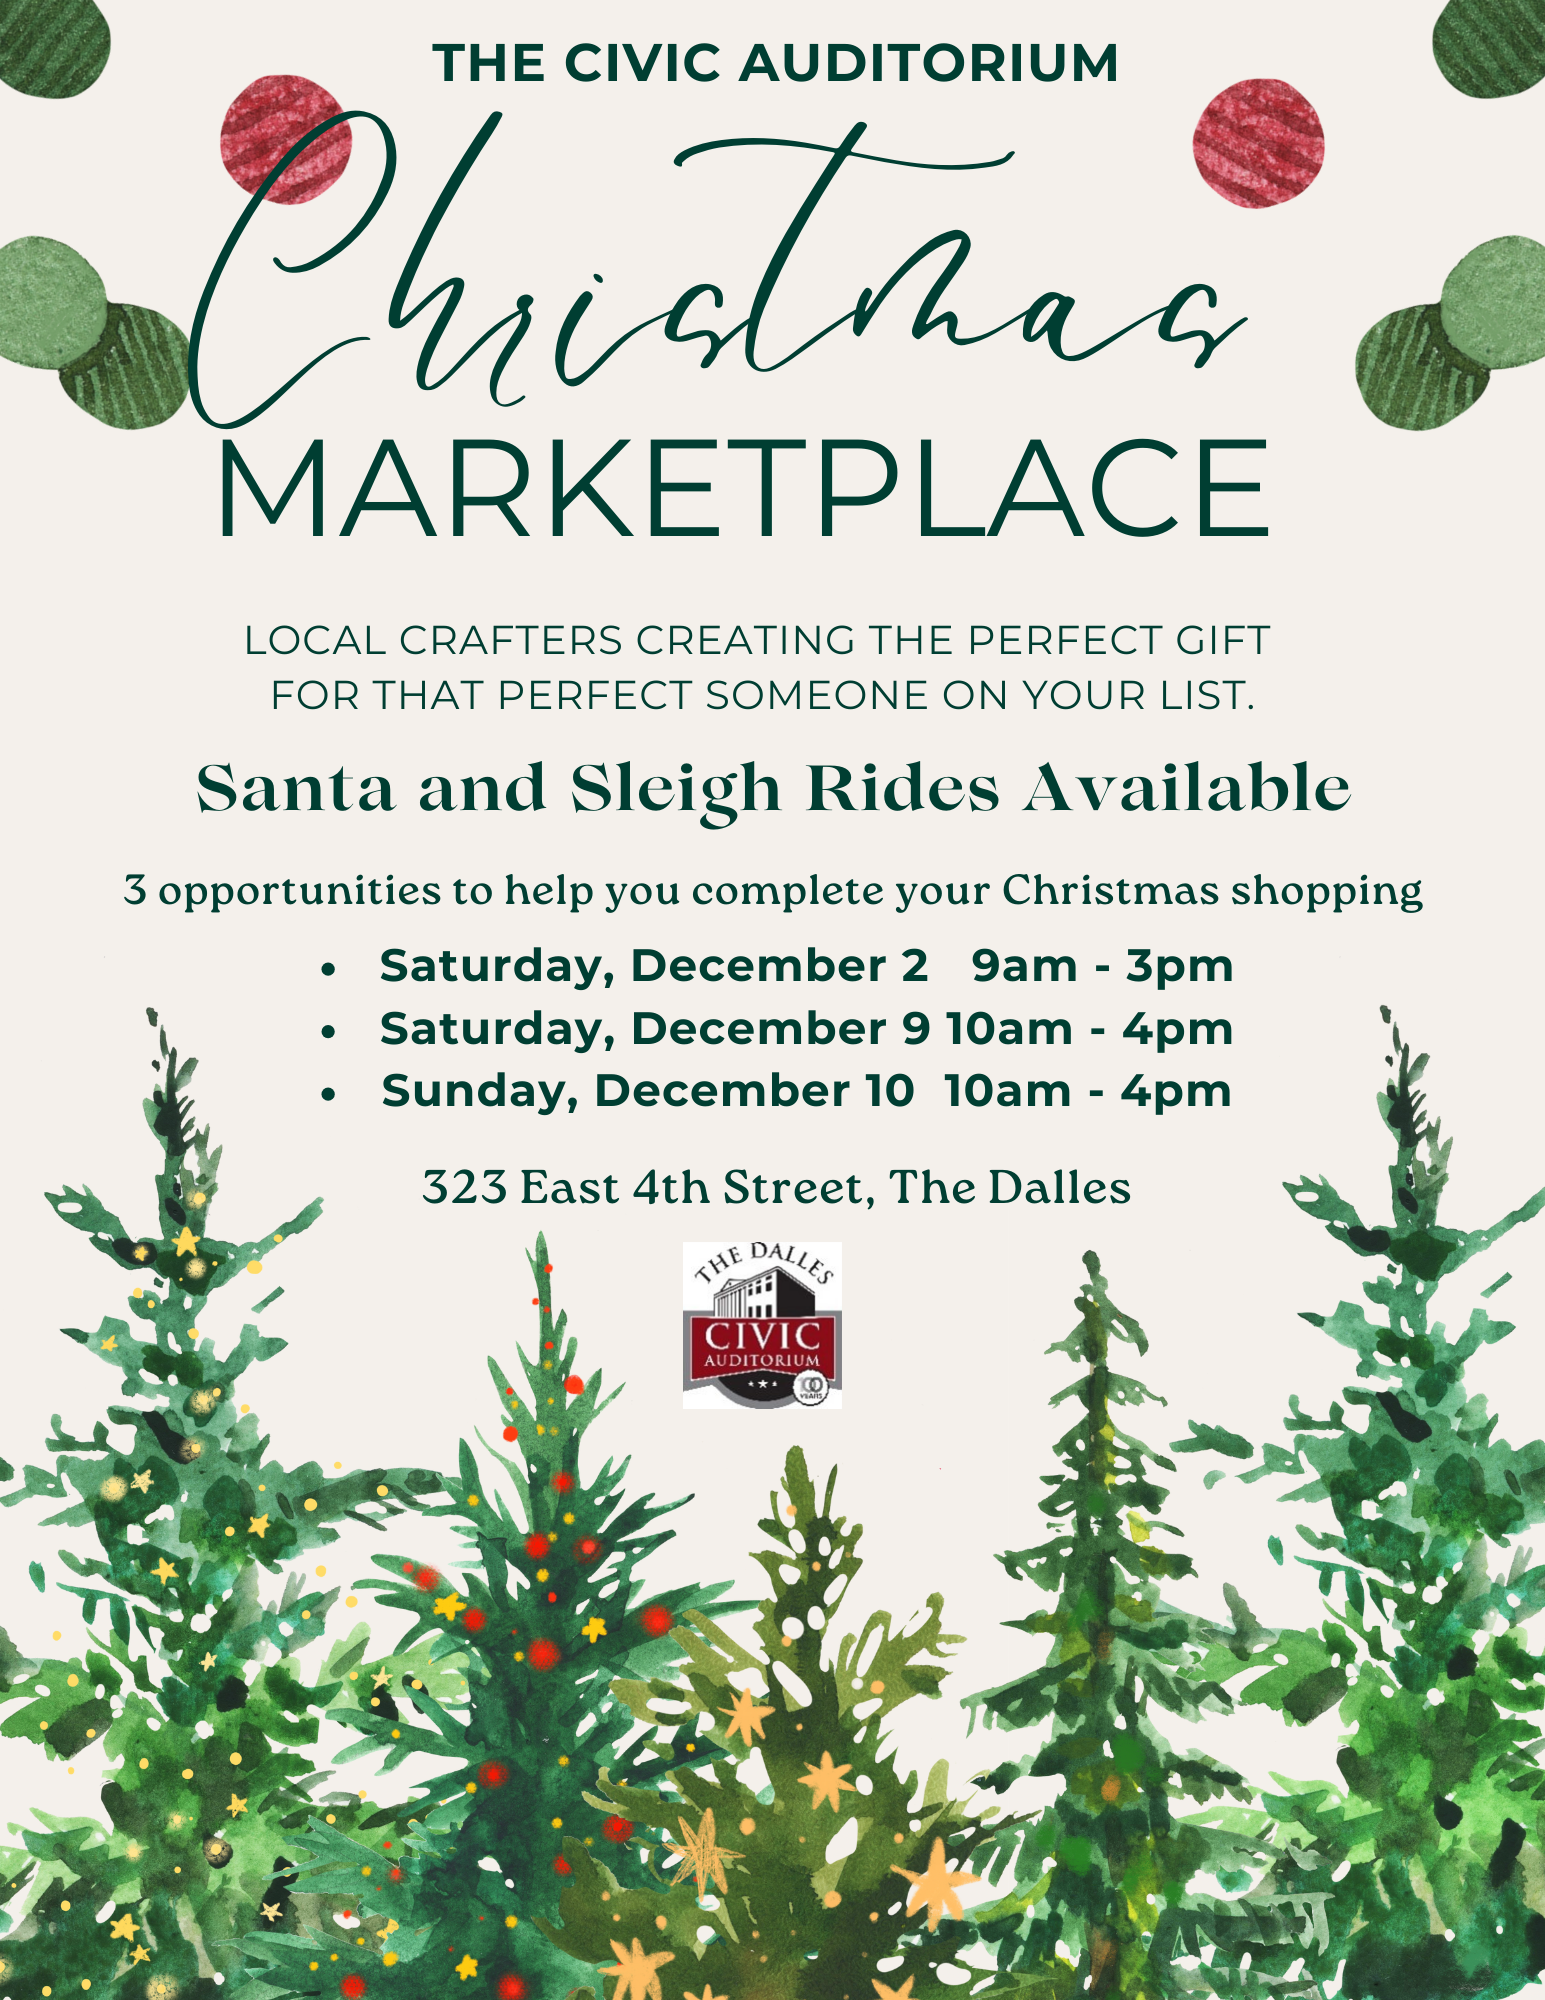 The Dalles Civic will be having 3 opportunties to shop local this Christmas.  Santa and his sleigh will be here too!  